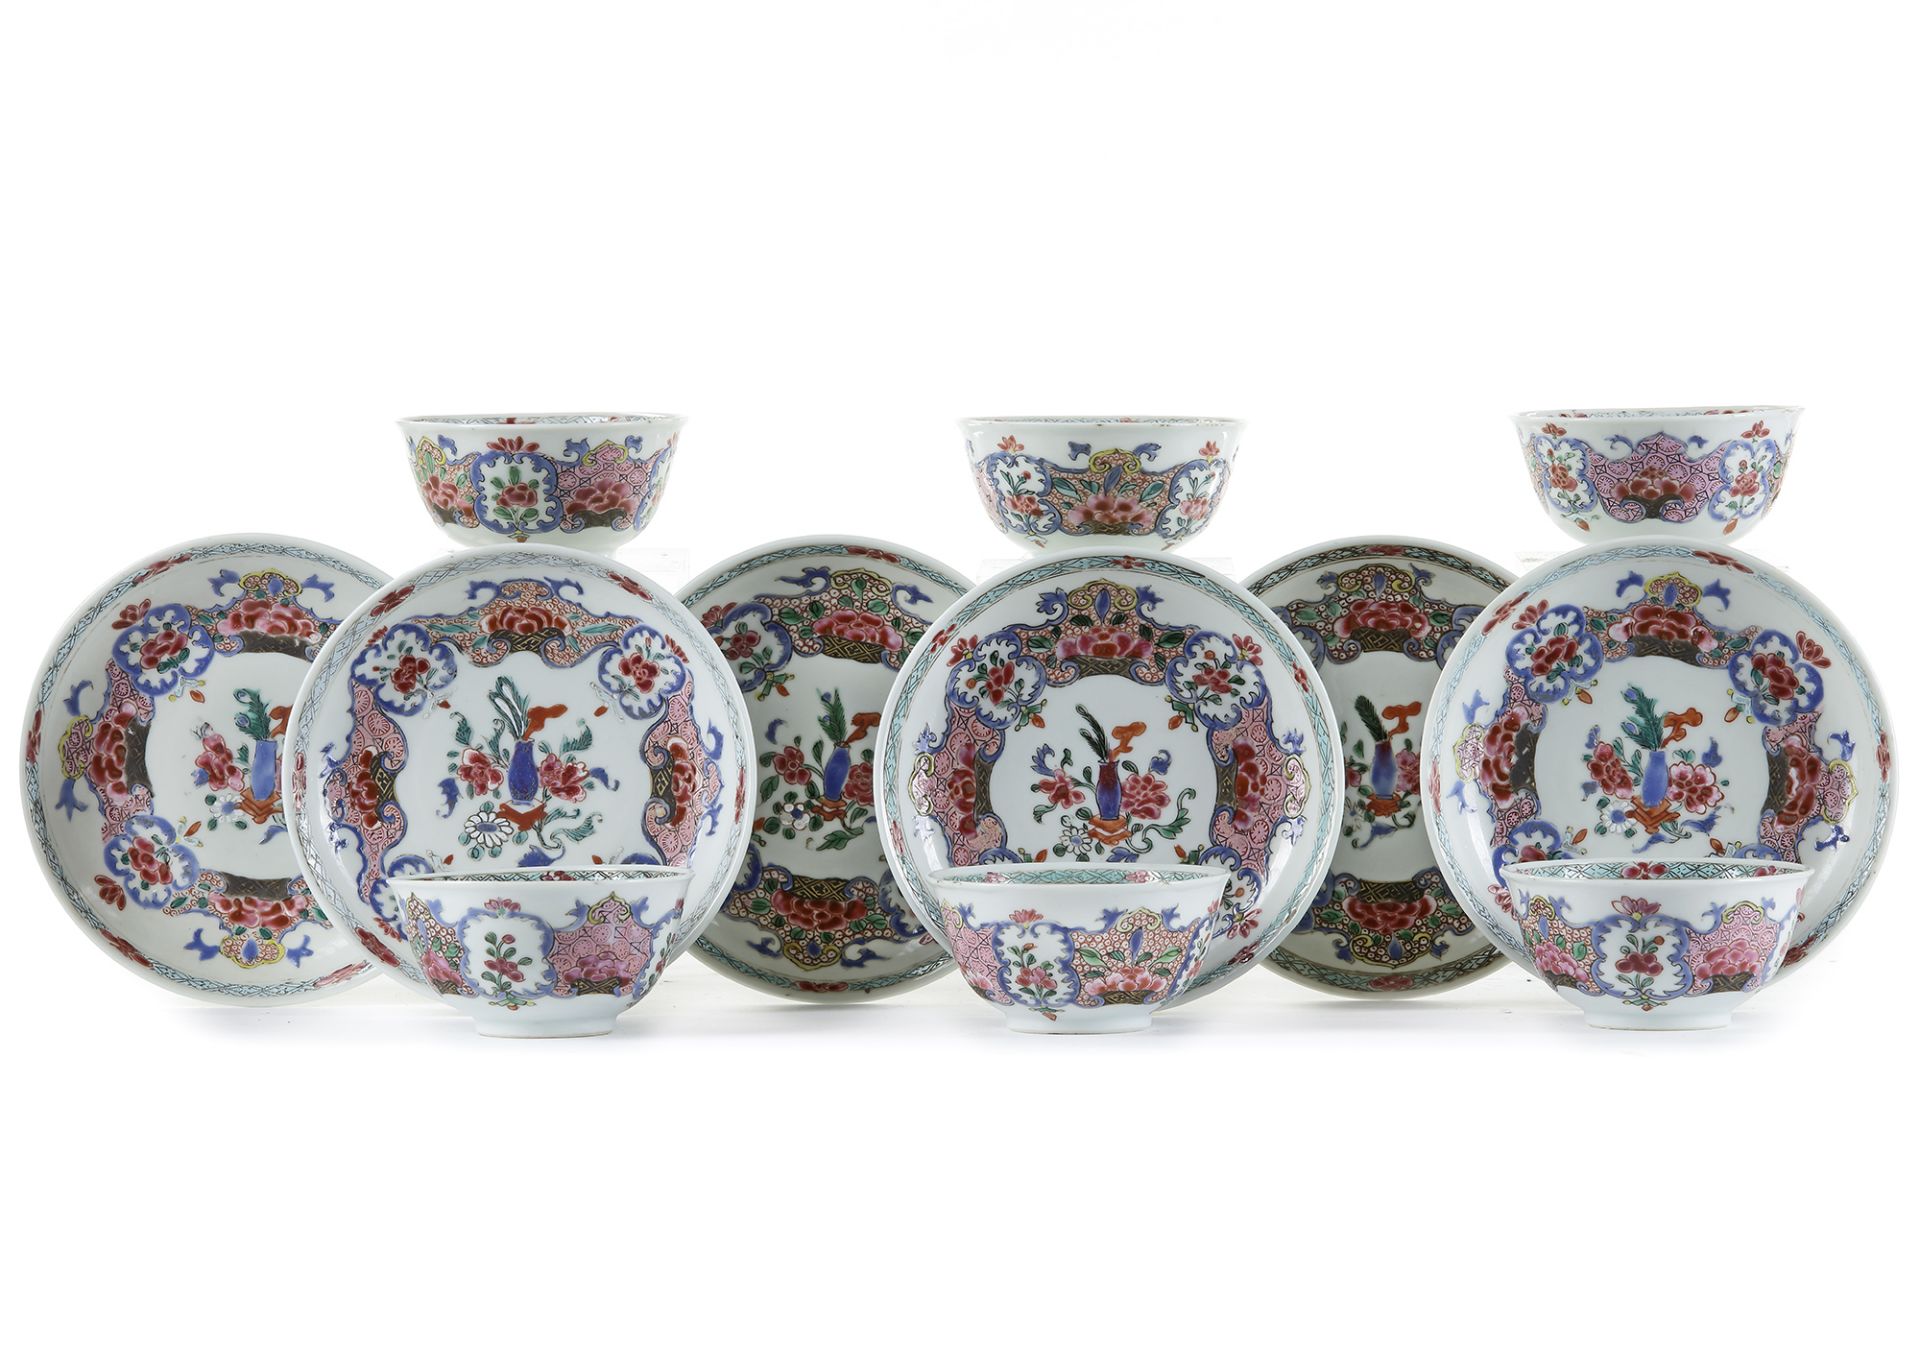 A SET OF SIX CHINESE FAMILLE ROSE CUPS AND SAUCERS, 18TH CENTURY